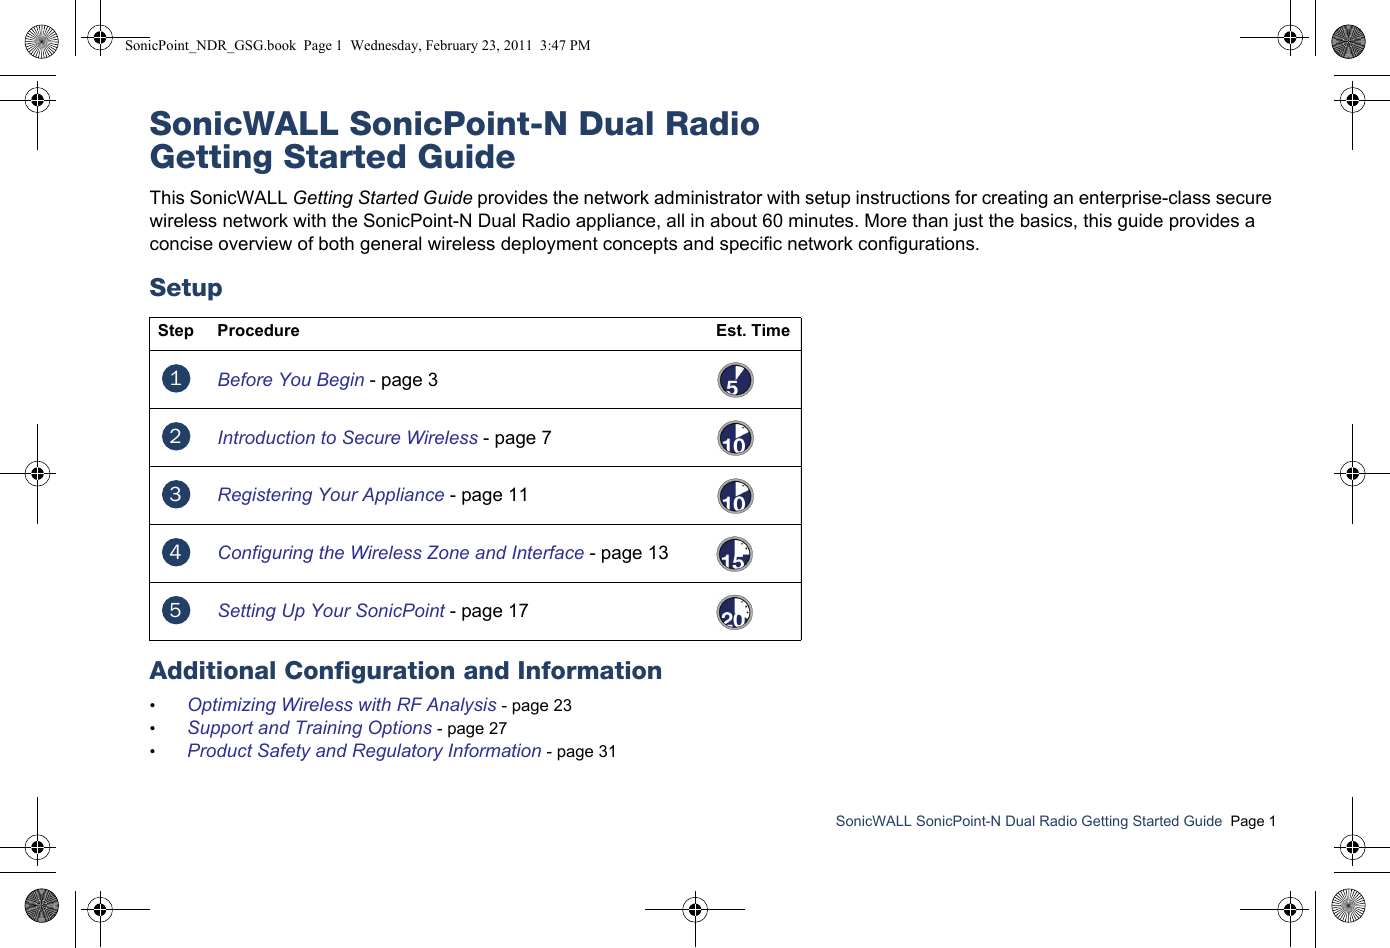 SonicWALL SonicPoint-N Dual Radio Getting Started Guide  Page 1SonicWALL SonicPoint-N Dual RadioGetting Started GuideThis SonicWALL Getting Started Guide provides the network administrator with setup instructions for creating an enterprise-class secure wireless network with the SonicPoint-N Dual Radio appliance, all in about 60 minutes. More than just the basics, this guide provides a concise overview of both general wireless deployment concepts and specific network configurations.SetupAdditional Configuration and Information•Optimizing Wireless with RF Analysis - page 23•Support and Training Options - page 27•Product Safety and Regulatory Information - page 31Step Procedure Est. TimeBefore You Begin - page 3Introduction to Secure Wireless - page 7Registering Your Appliance - page 11Configuring the Wireless Zone and Interface - page 13Setting Up Your SonicPoint - page 1712345SonicPoint_NDR_GSG.book  Page 1  Wednesday, February 23, 2011  3:47 PM